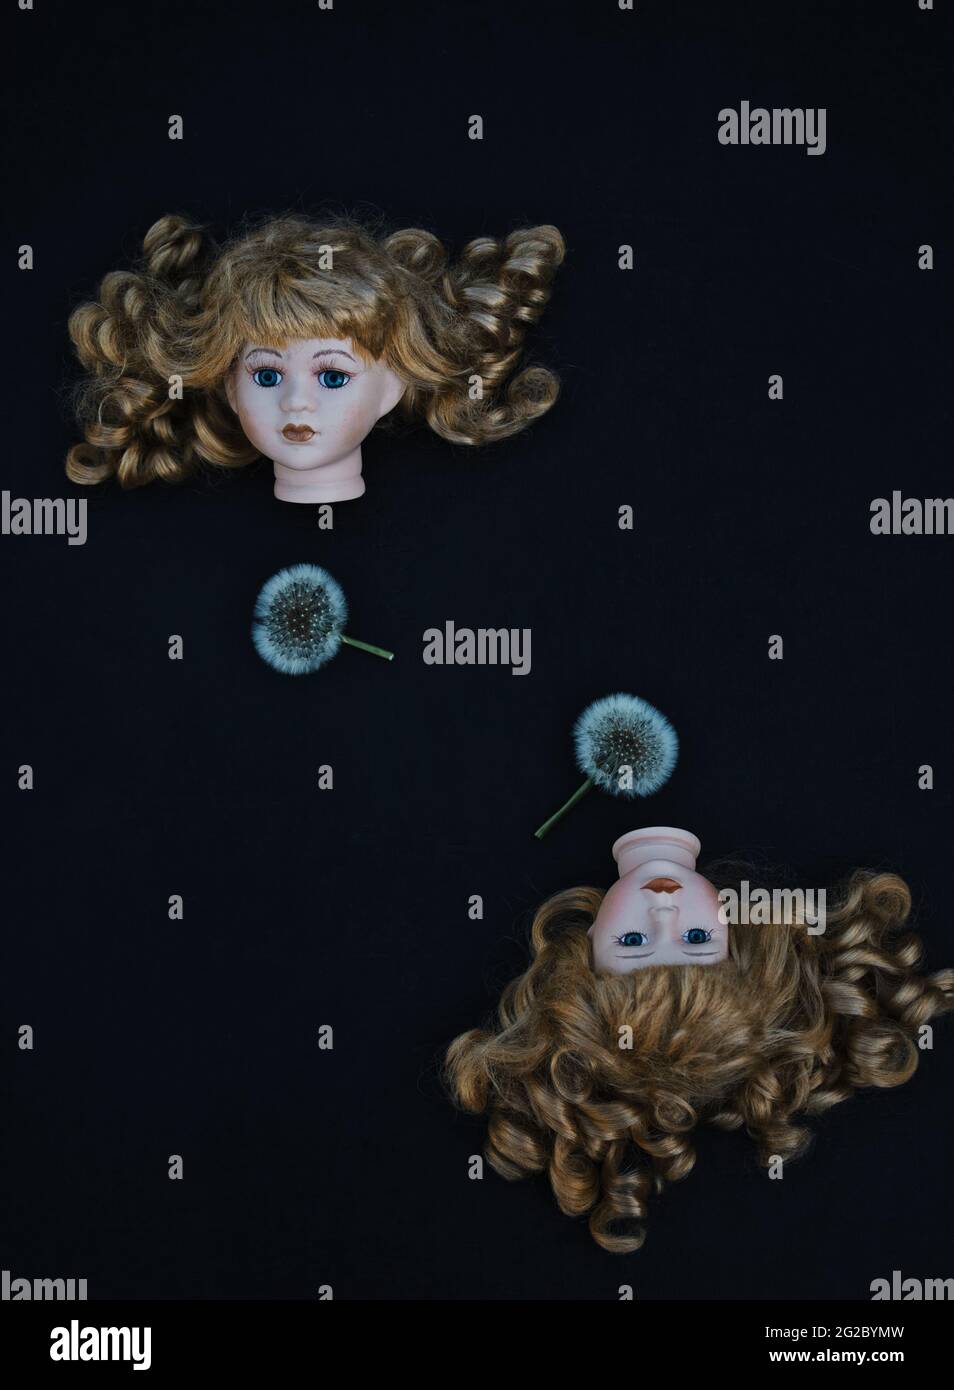 Directly above two porcelain dolls heads with curly hair and two dandelion seed heads on black background. Concept of pair, identical, two of a kind Stock Photo